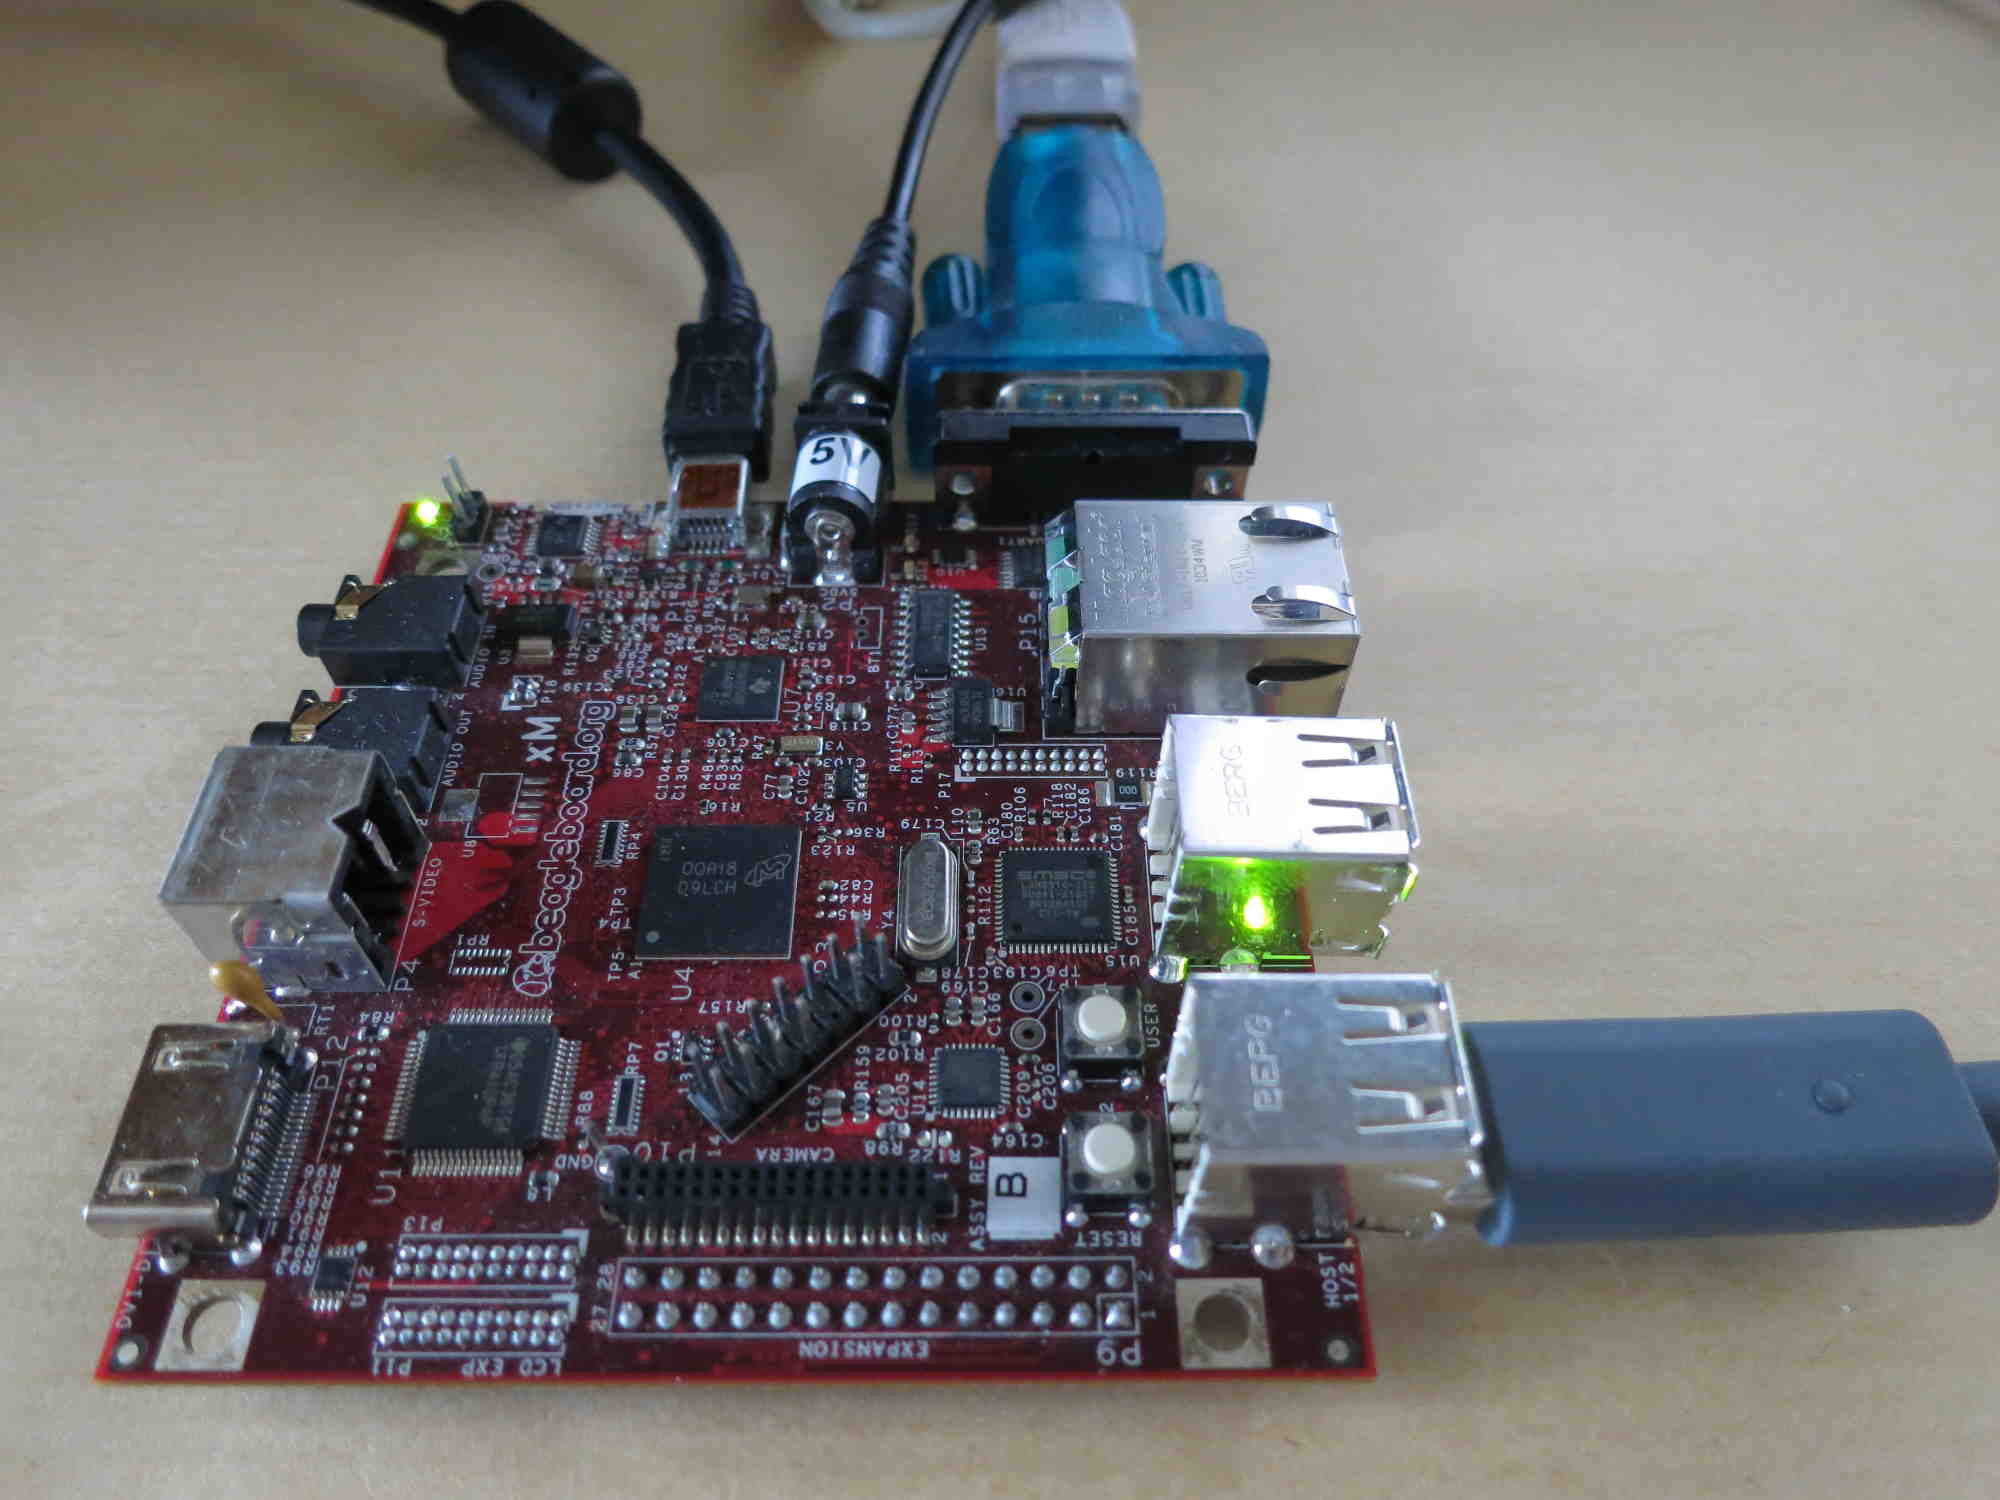 USB Sniffing With The BeagleBoard-xM | Hackaday